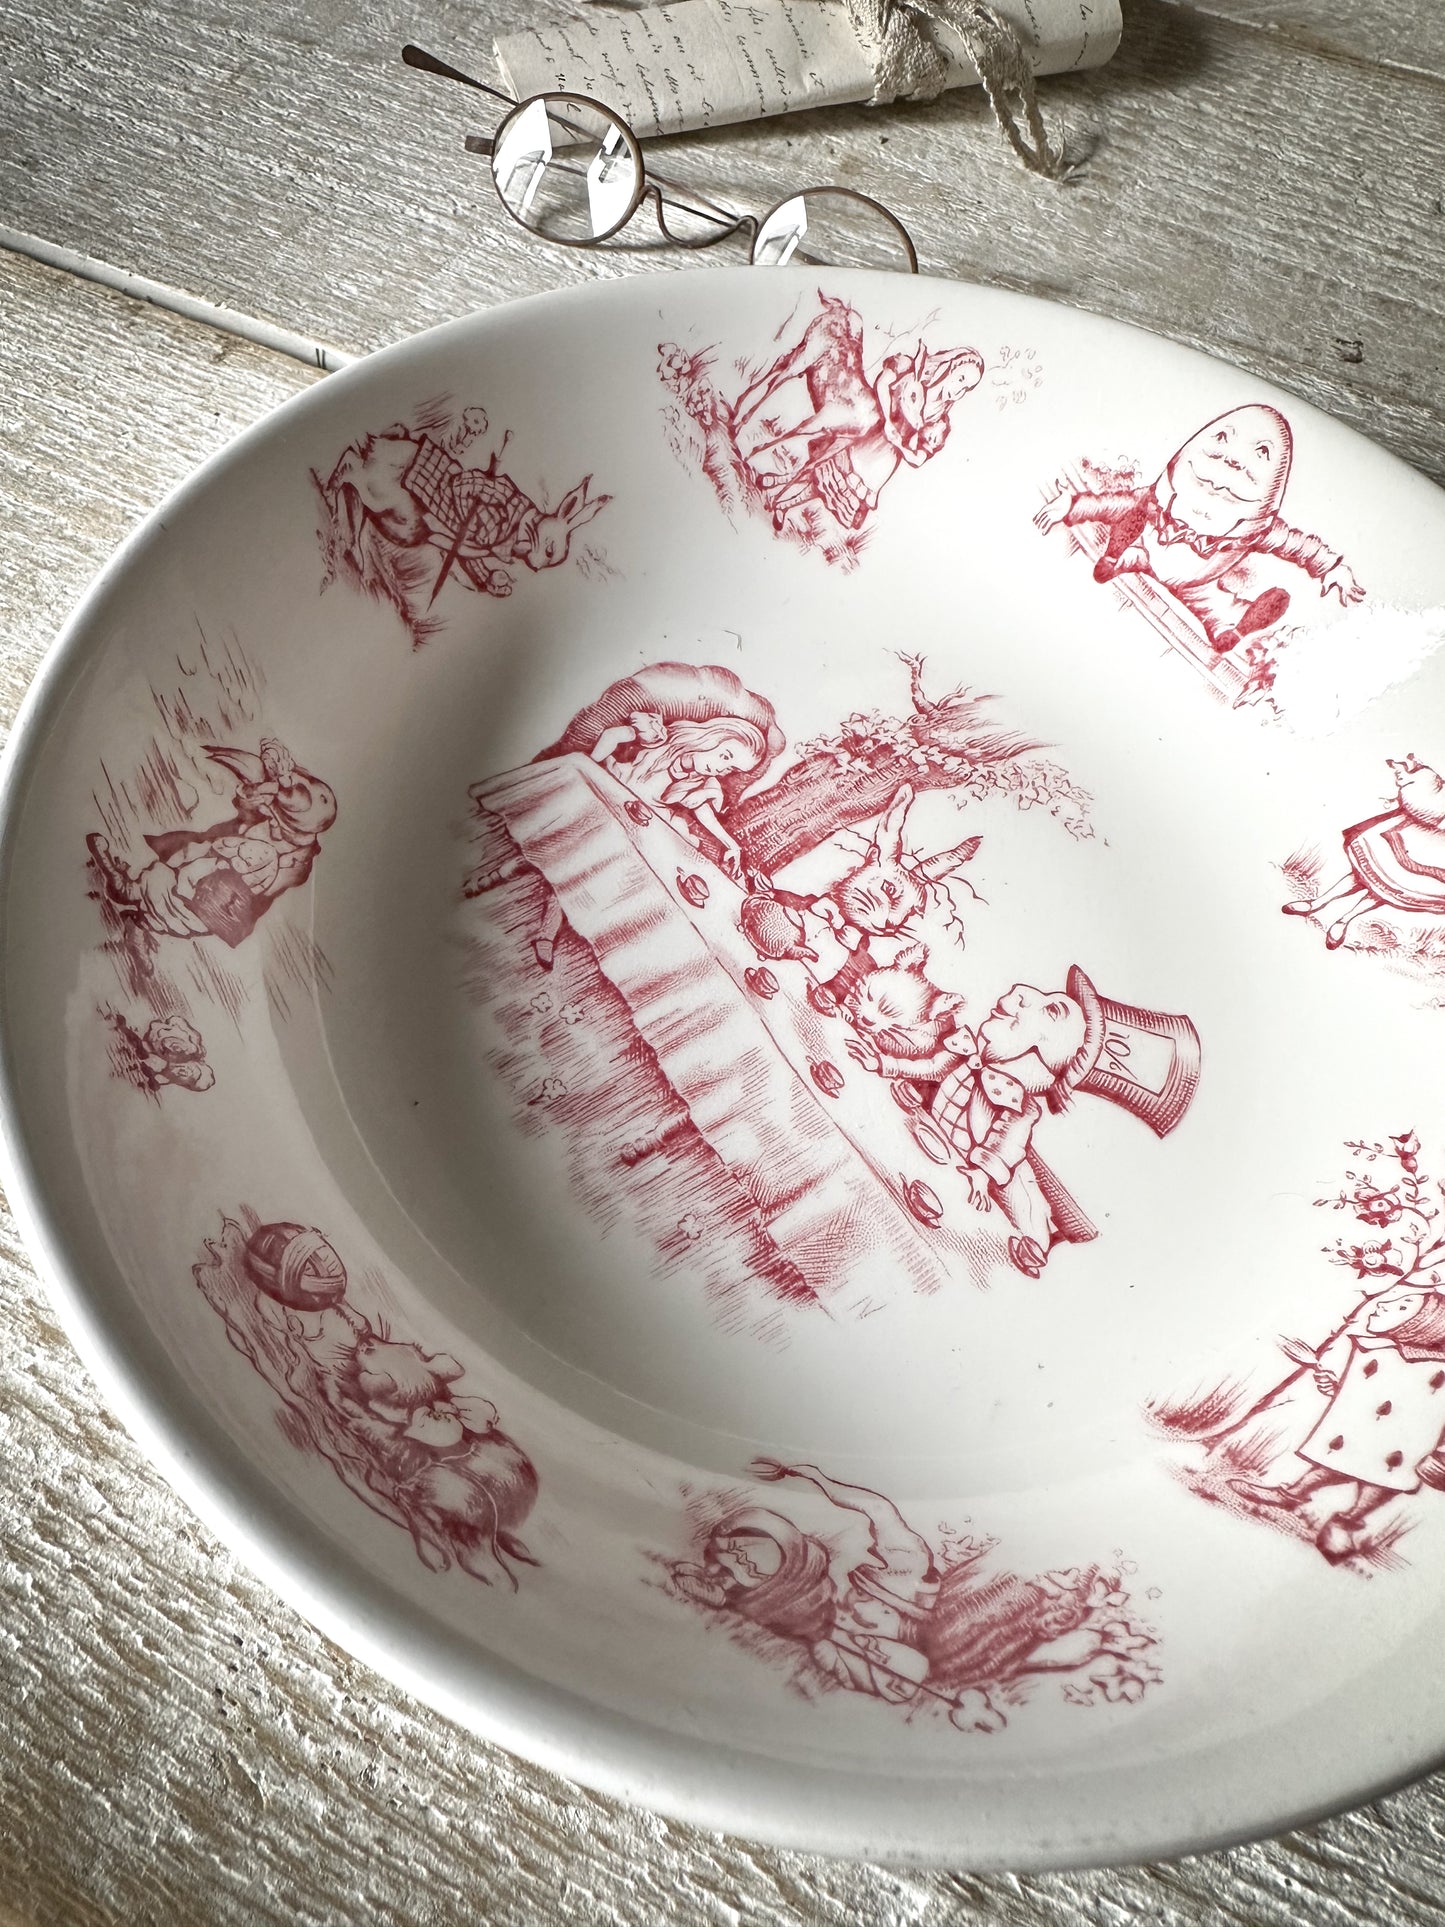 A rare Alice in Wonderland Johnson Bros. Red and white transfer dish